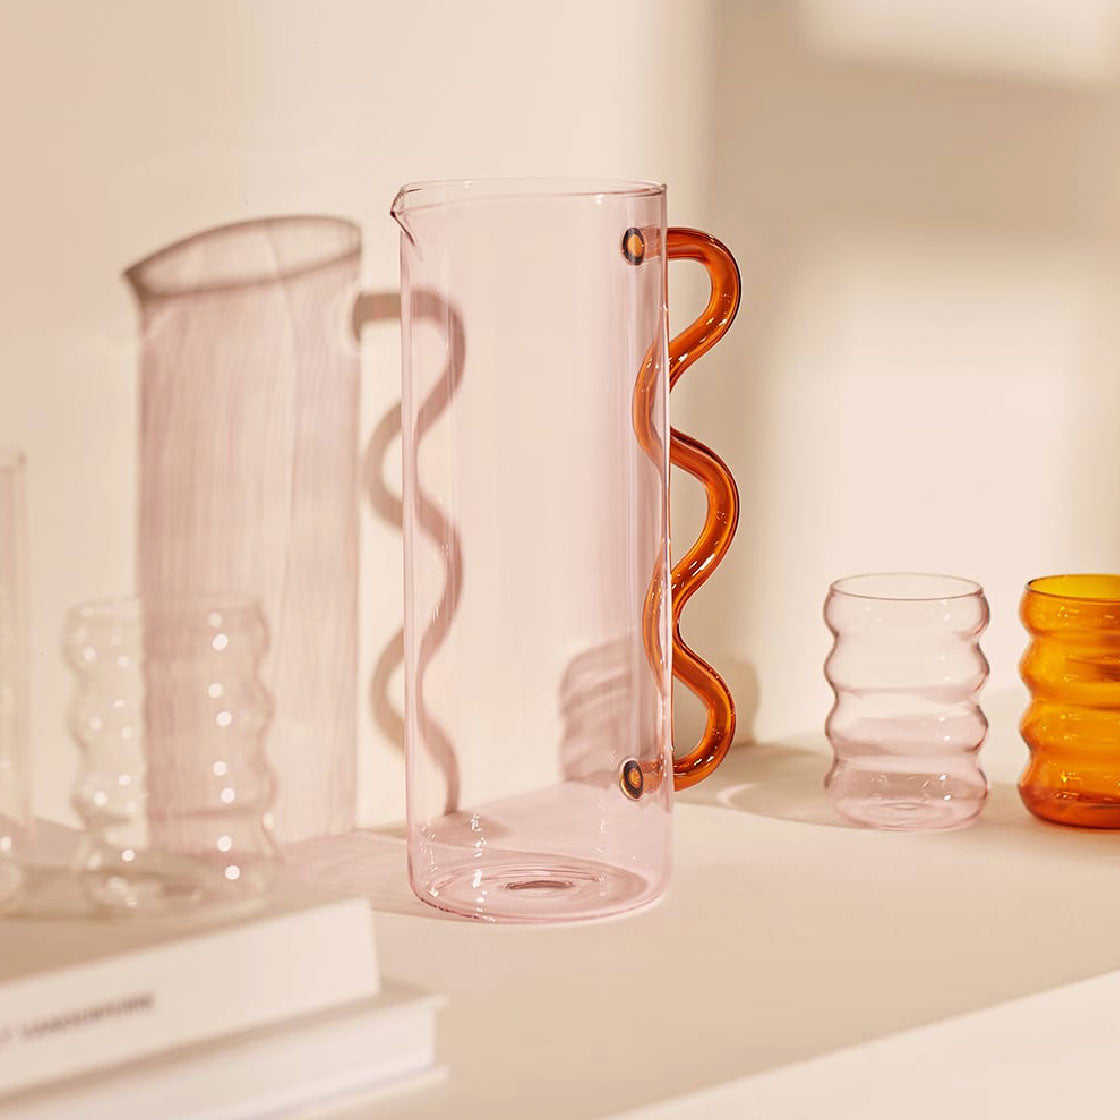 Wave Pitcher - Pink with Amber